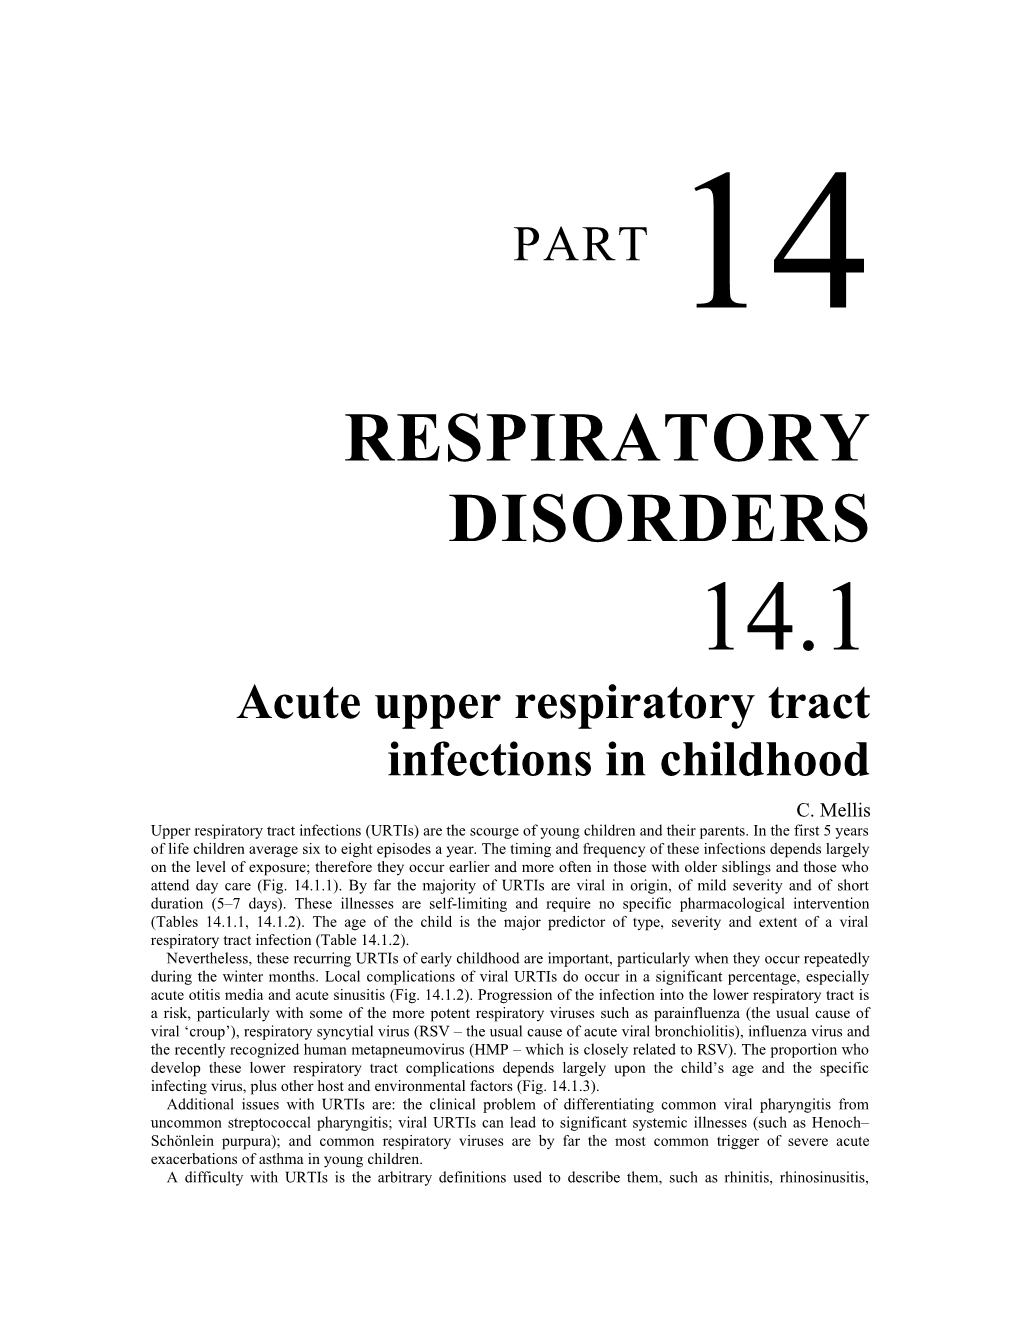 Acute Upper Respiratory Tract Infections in Childhood